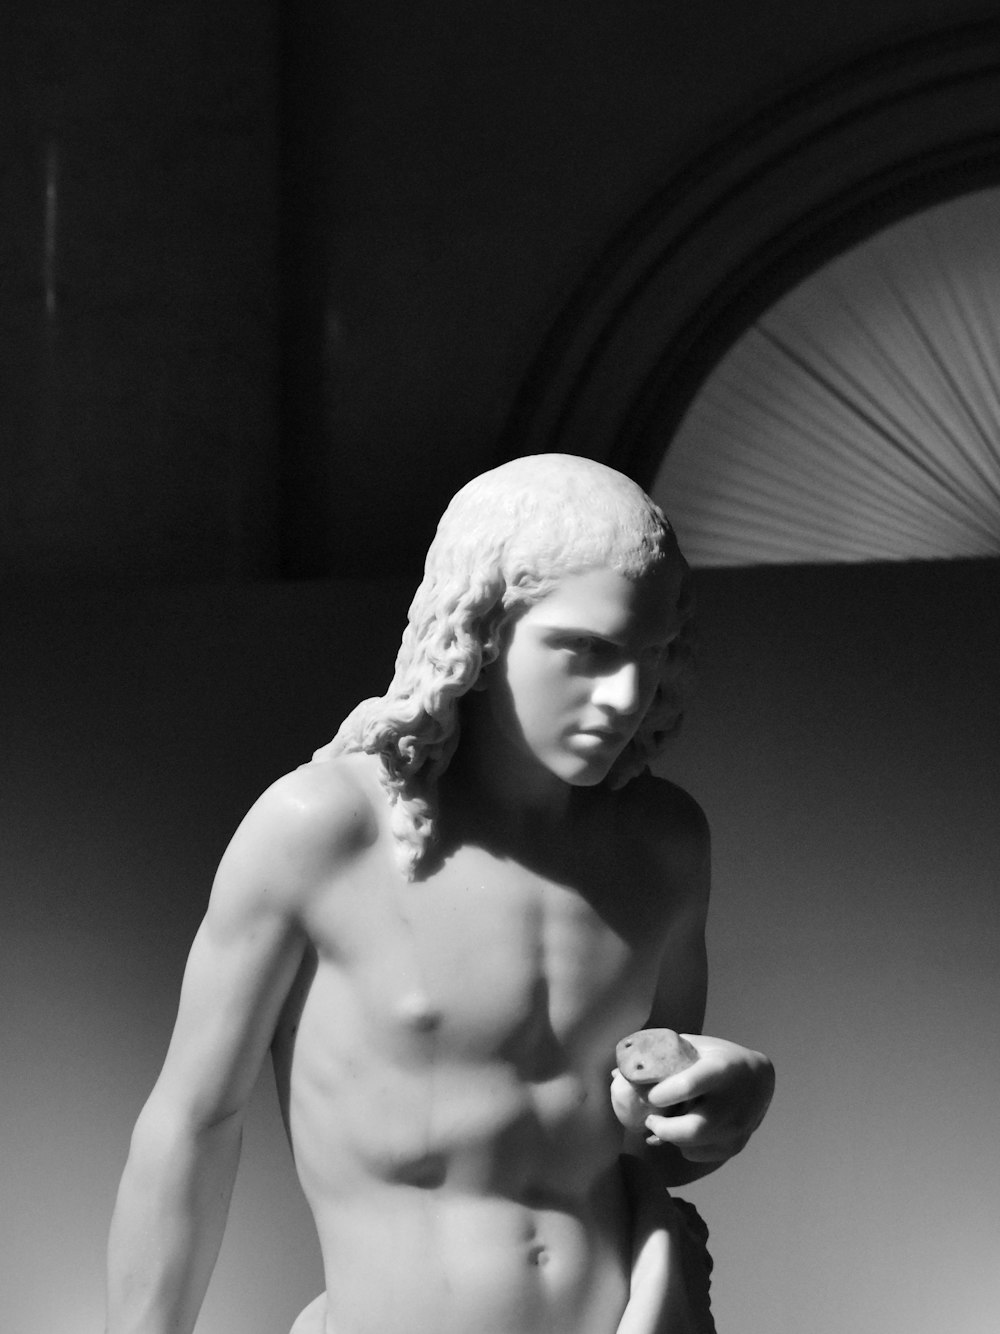 a black and white photo of a statue of a man